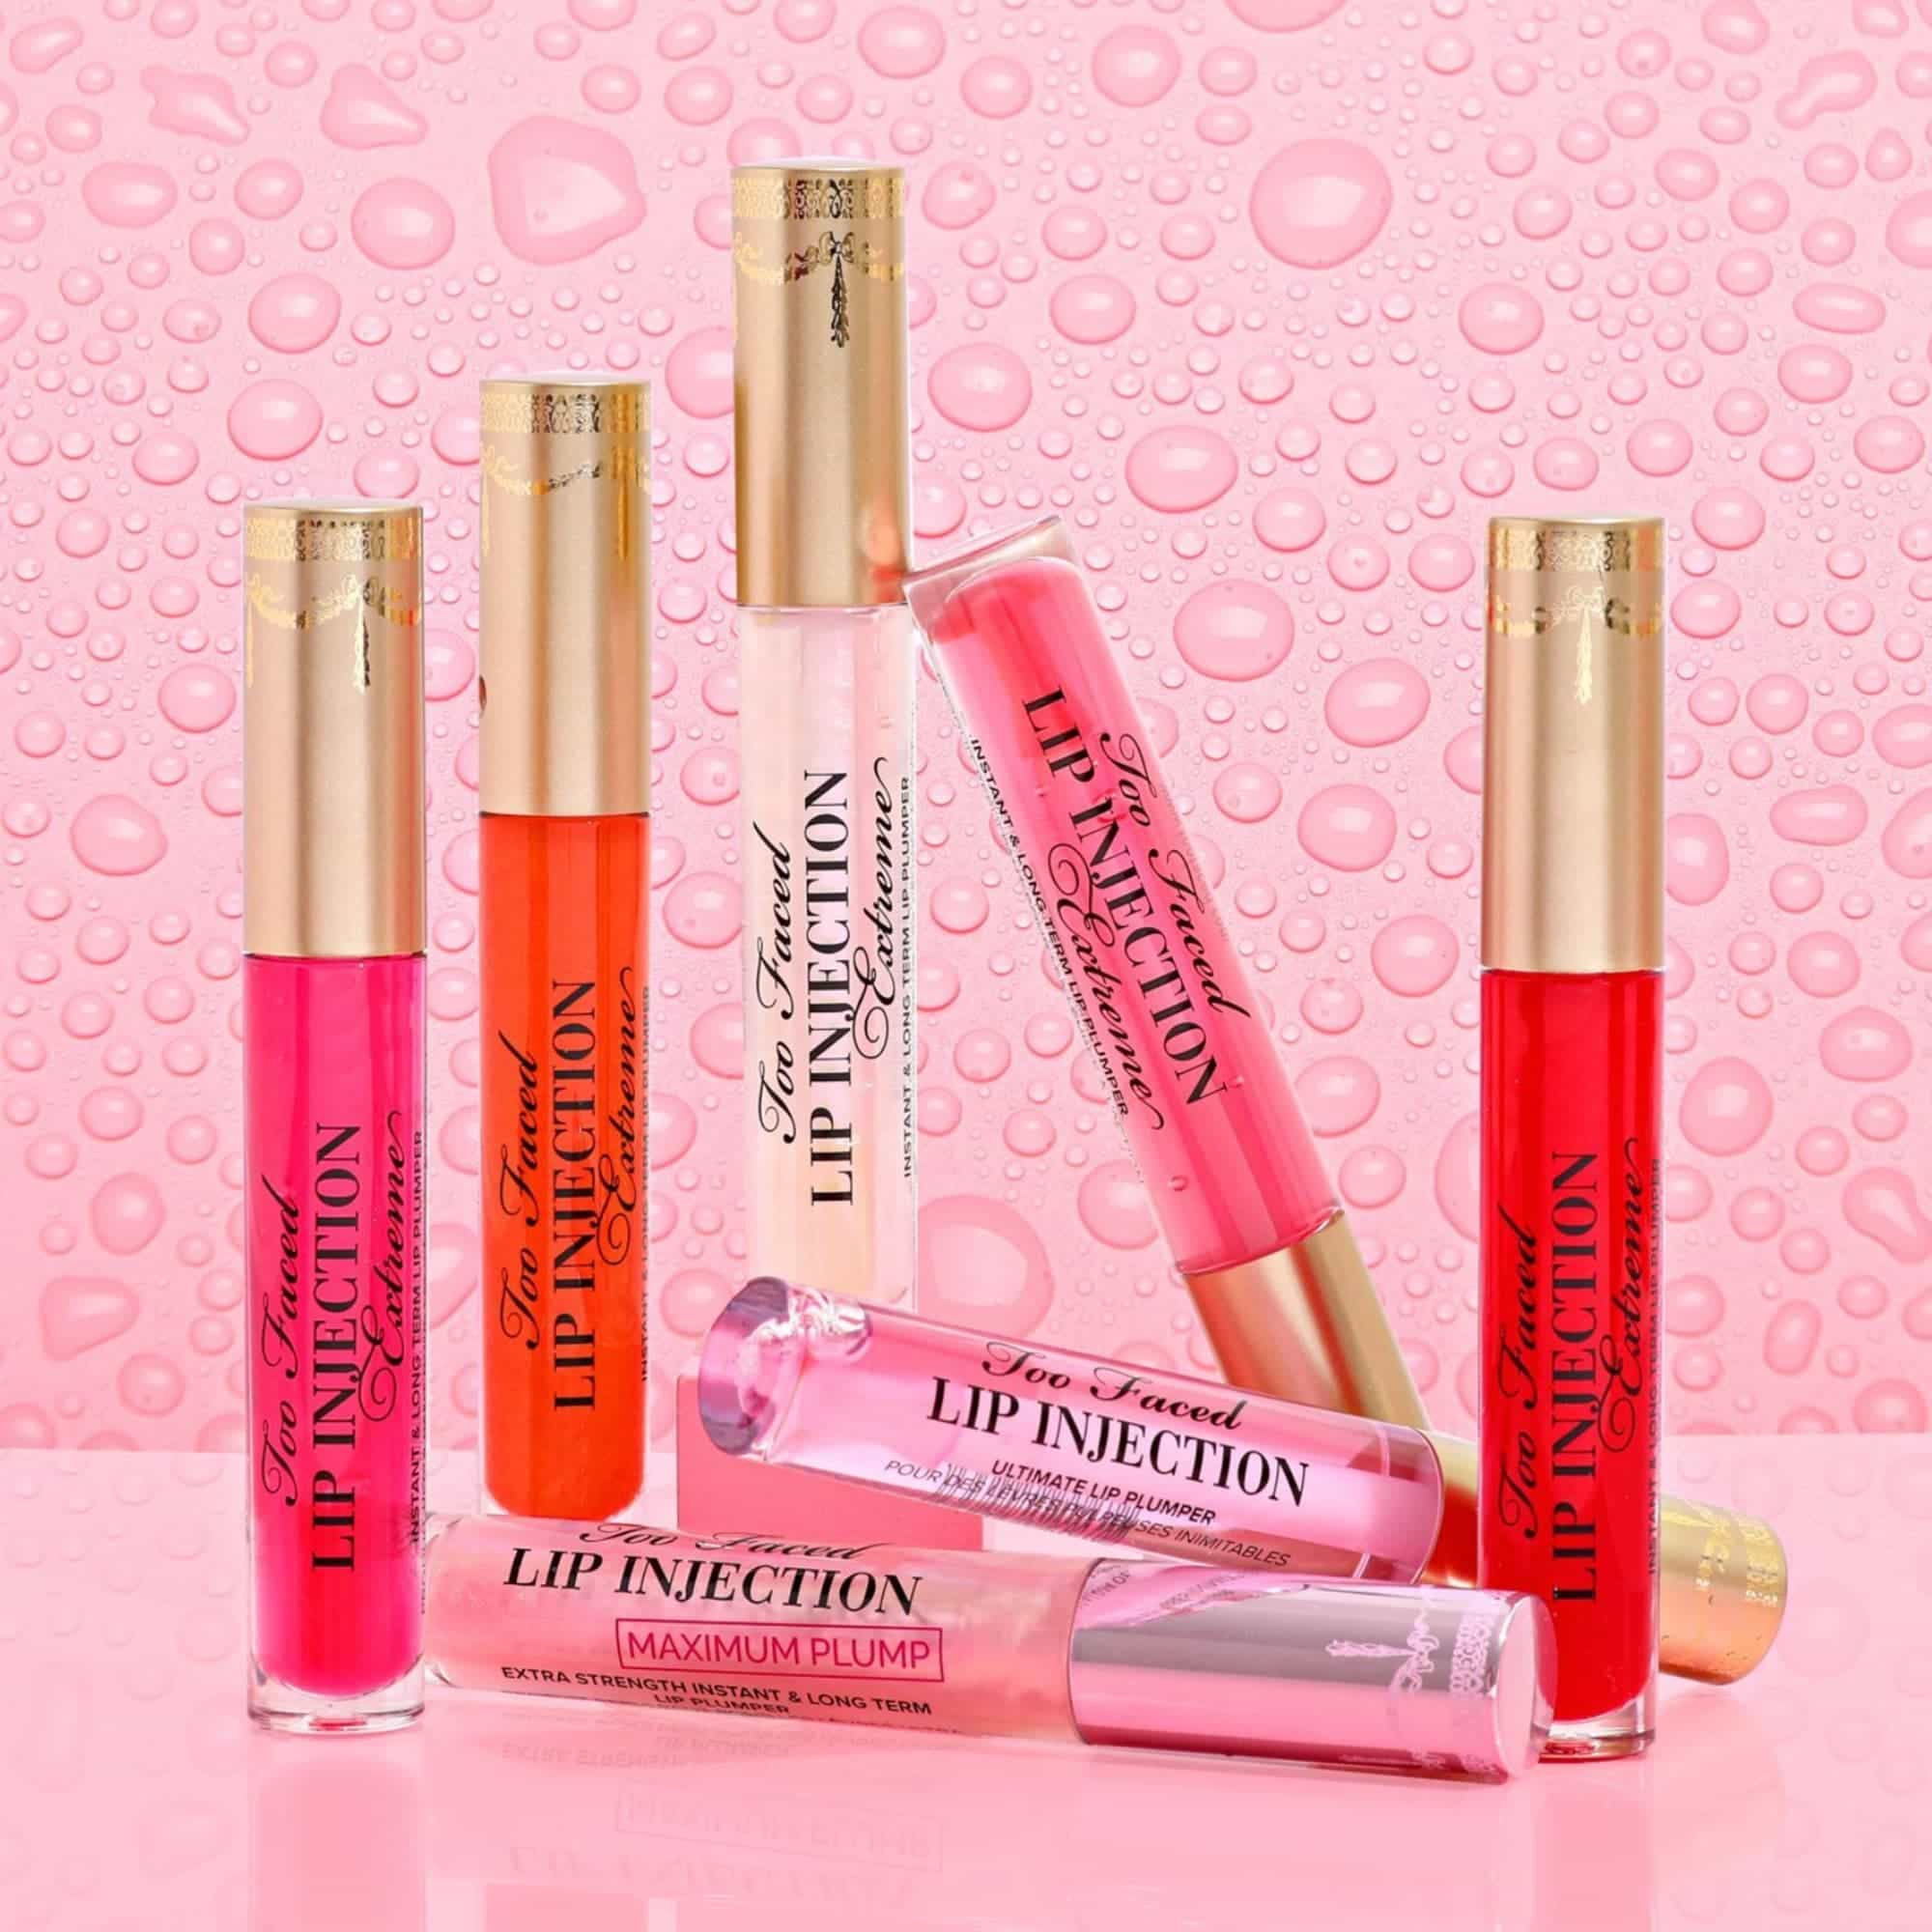 Too Faced - Lip Injection Extreme Lip Plumper Hydrating Plumping Lip Gloss 4.0 G